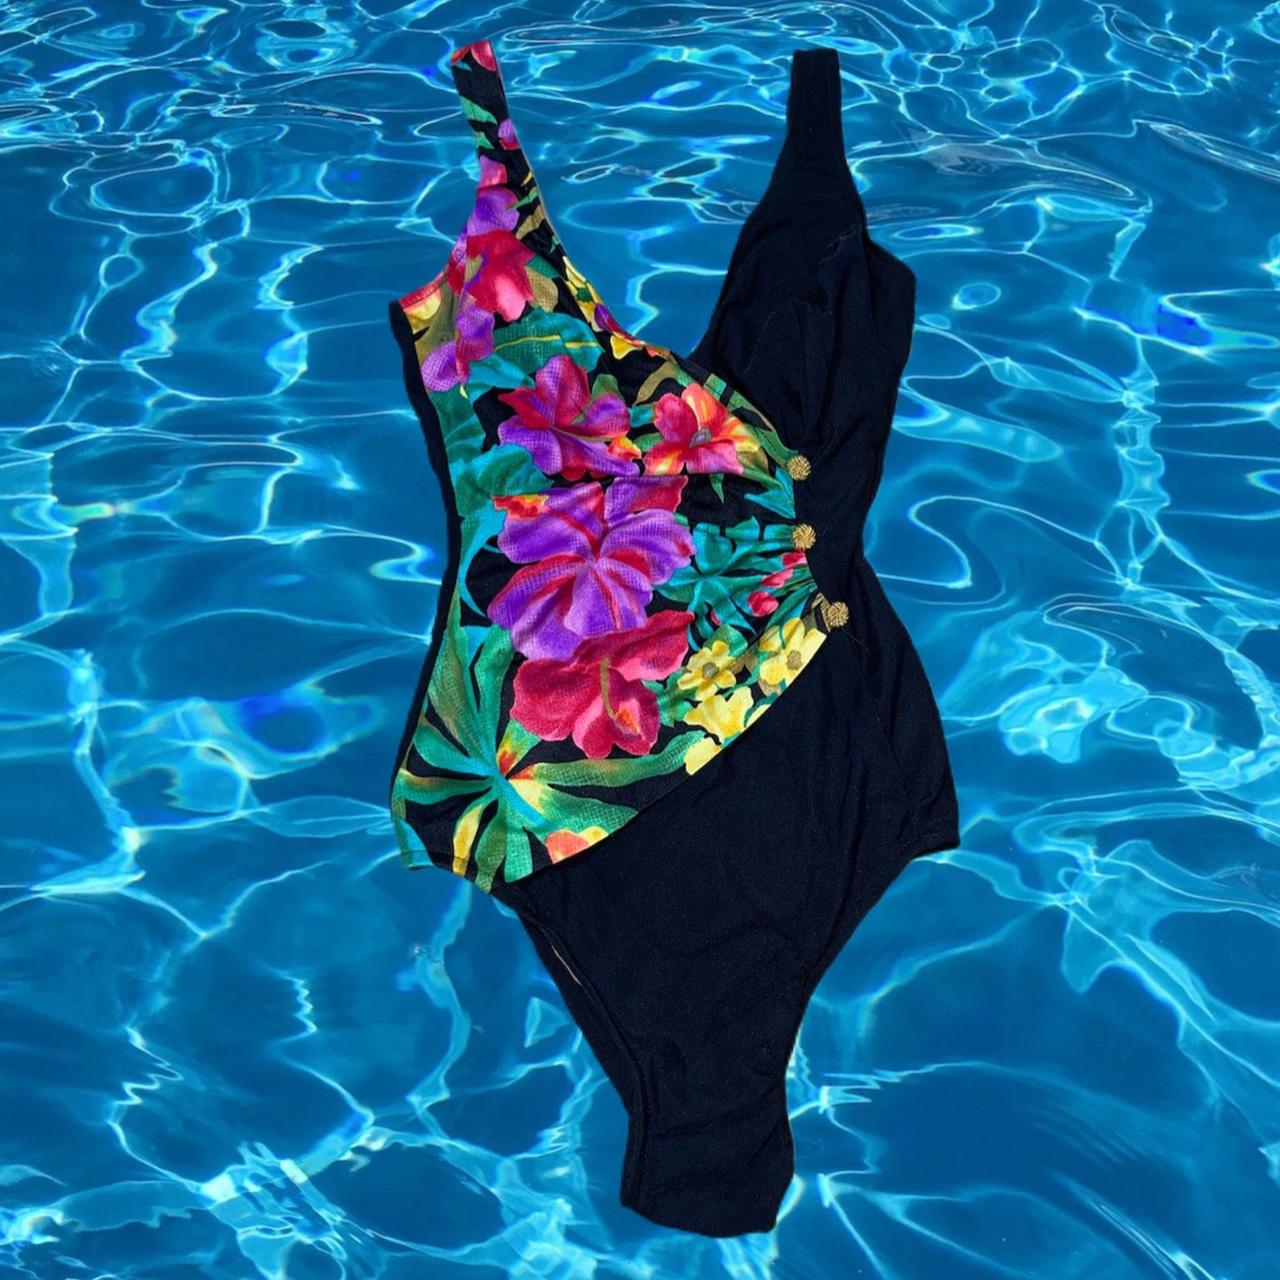 Product Image 2 - Vintage bathing suit ONE PIECE😍😍😍🥰
Perfect